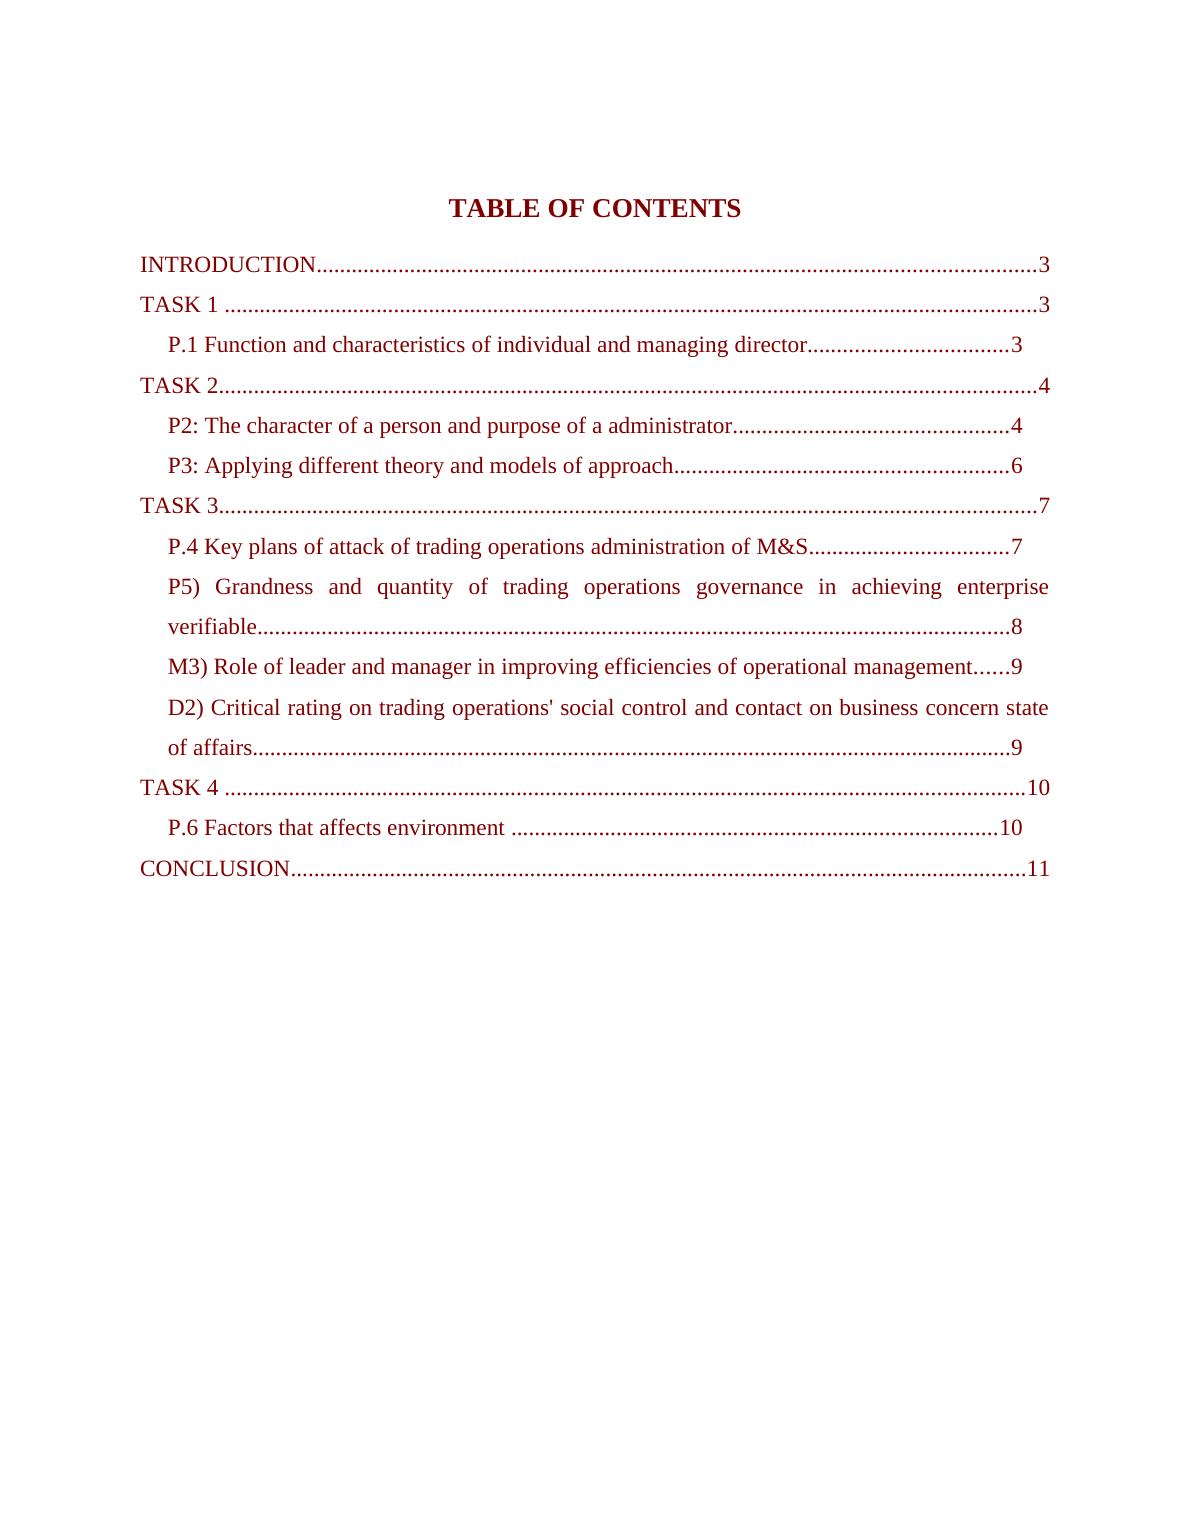 Managing Operations and Trading Operations TABLE OF CONTENTS INTRODUCTION 3 TASK 13 P.1 Function and Characteristics of an Administrator_2